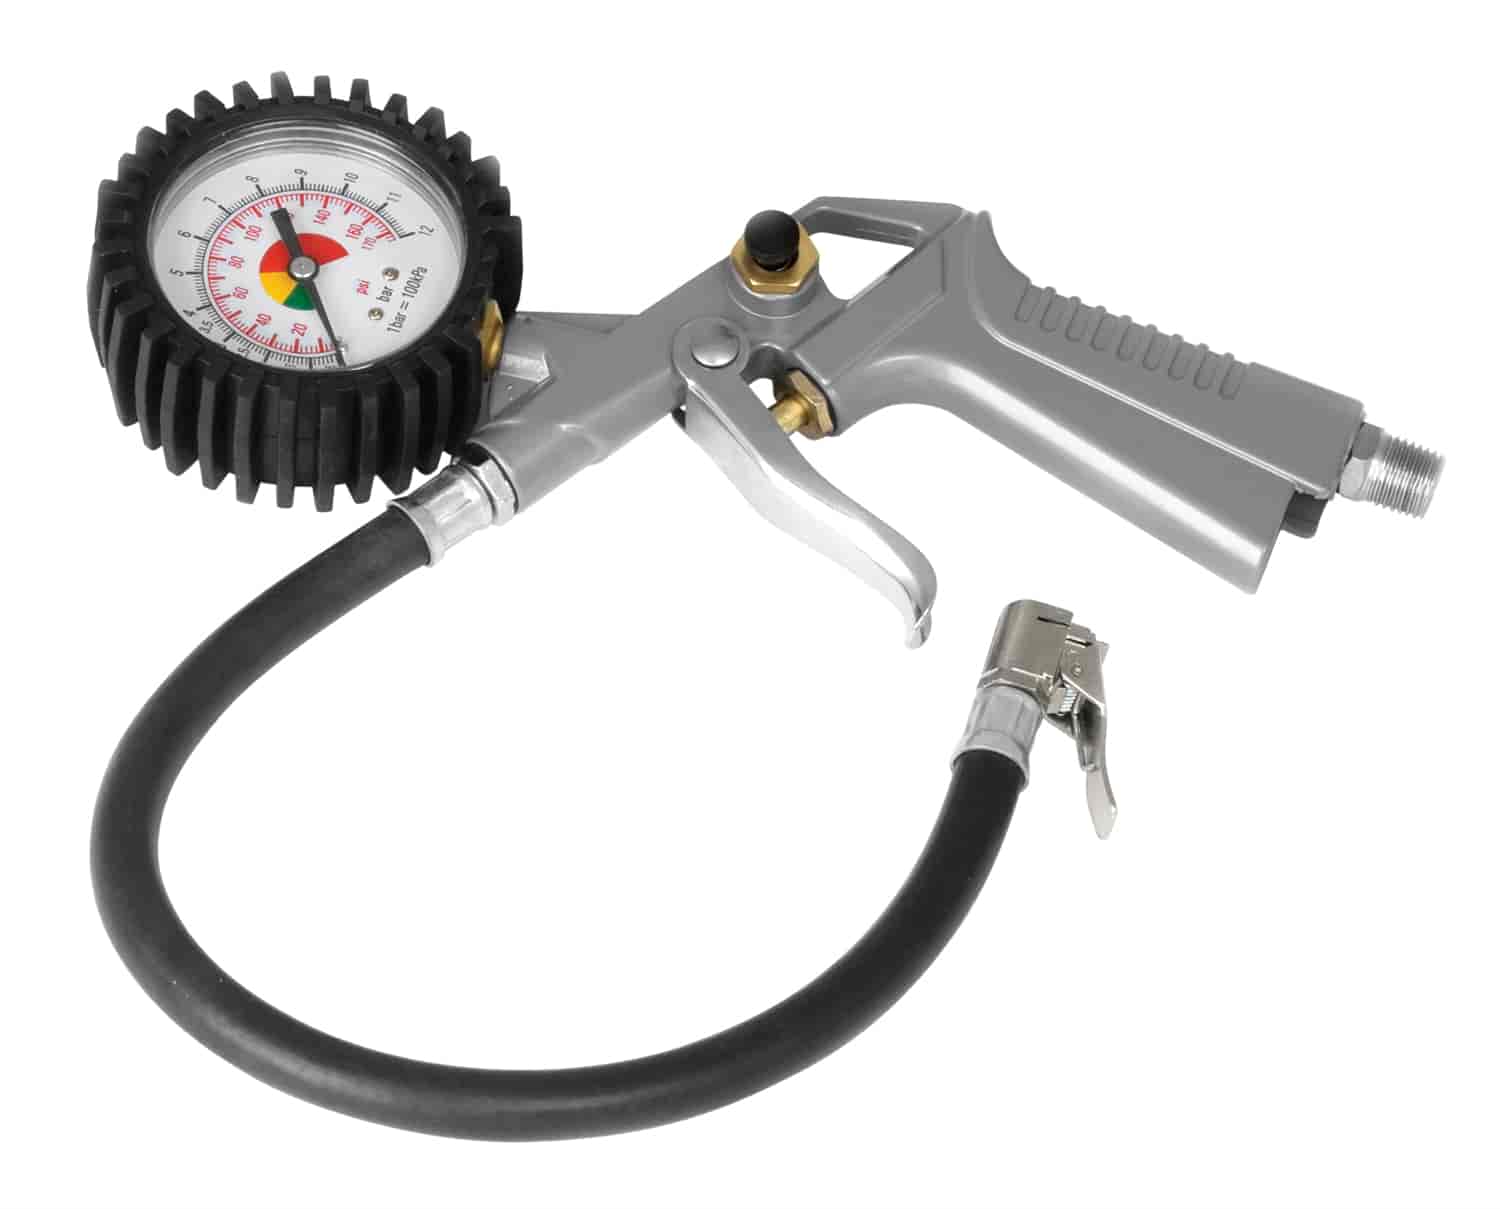 Tire Inflator with Dial Gauge